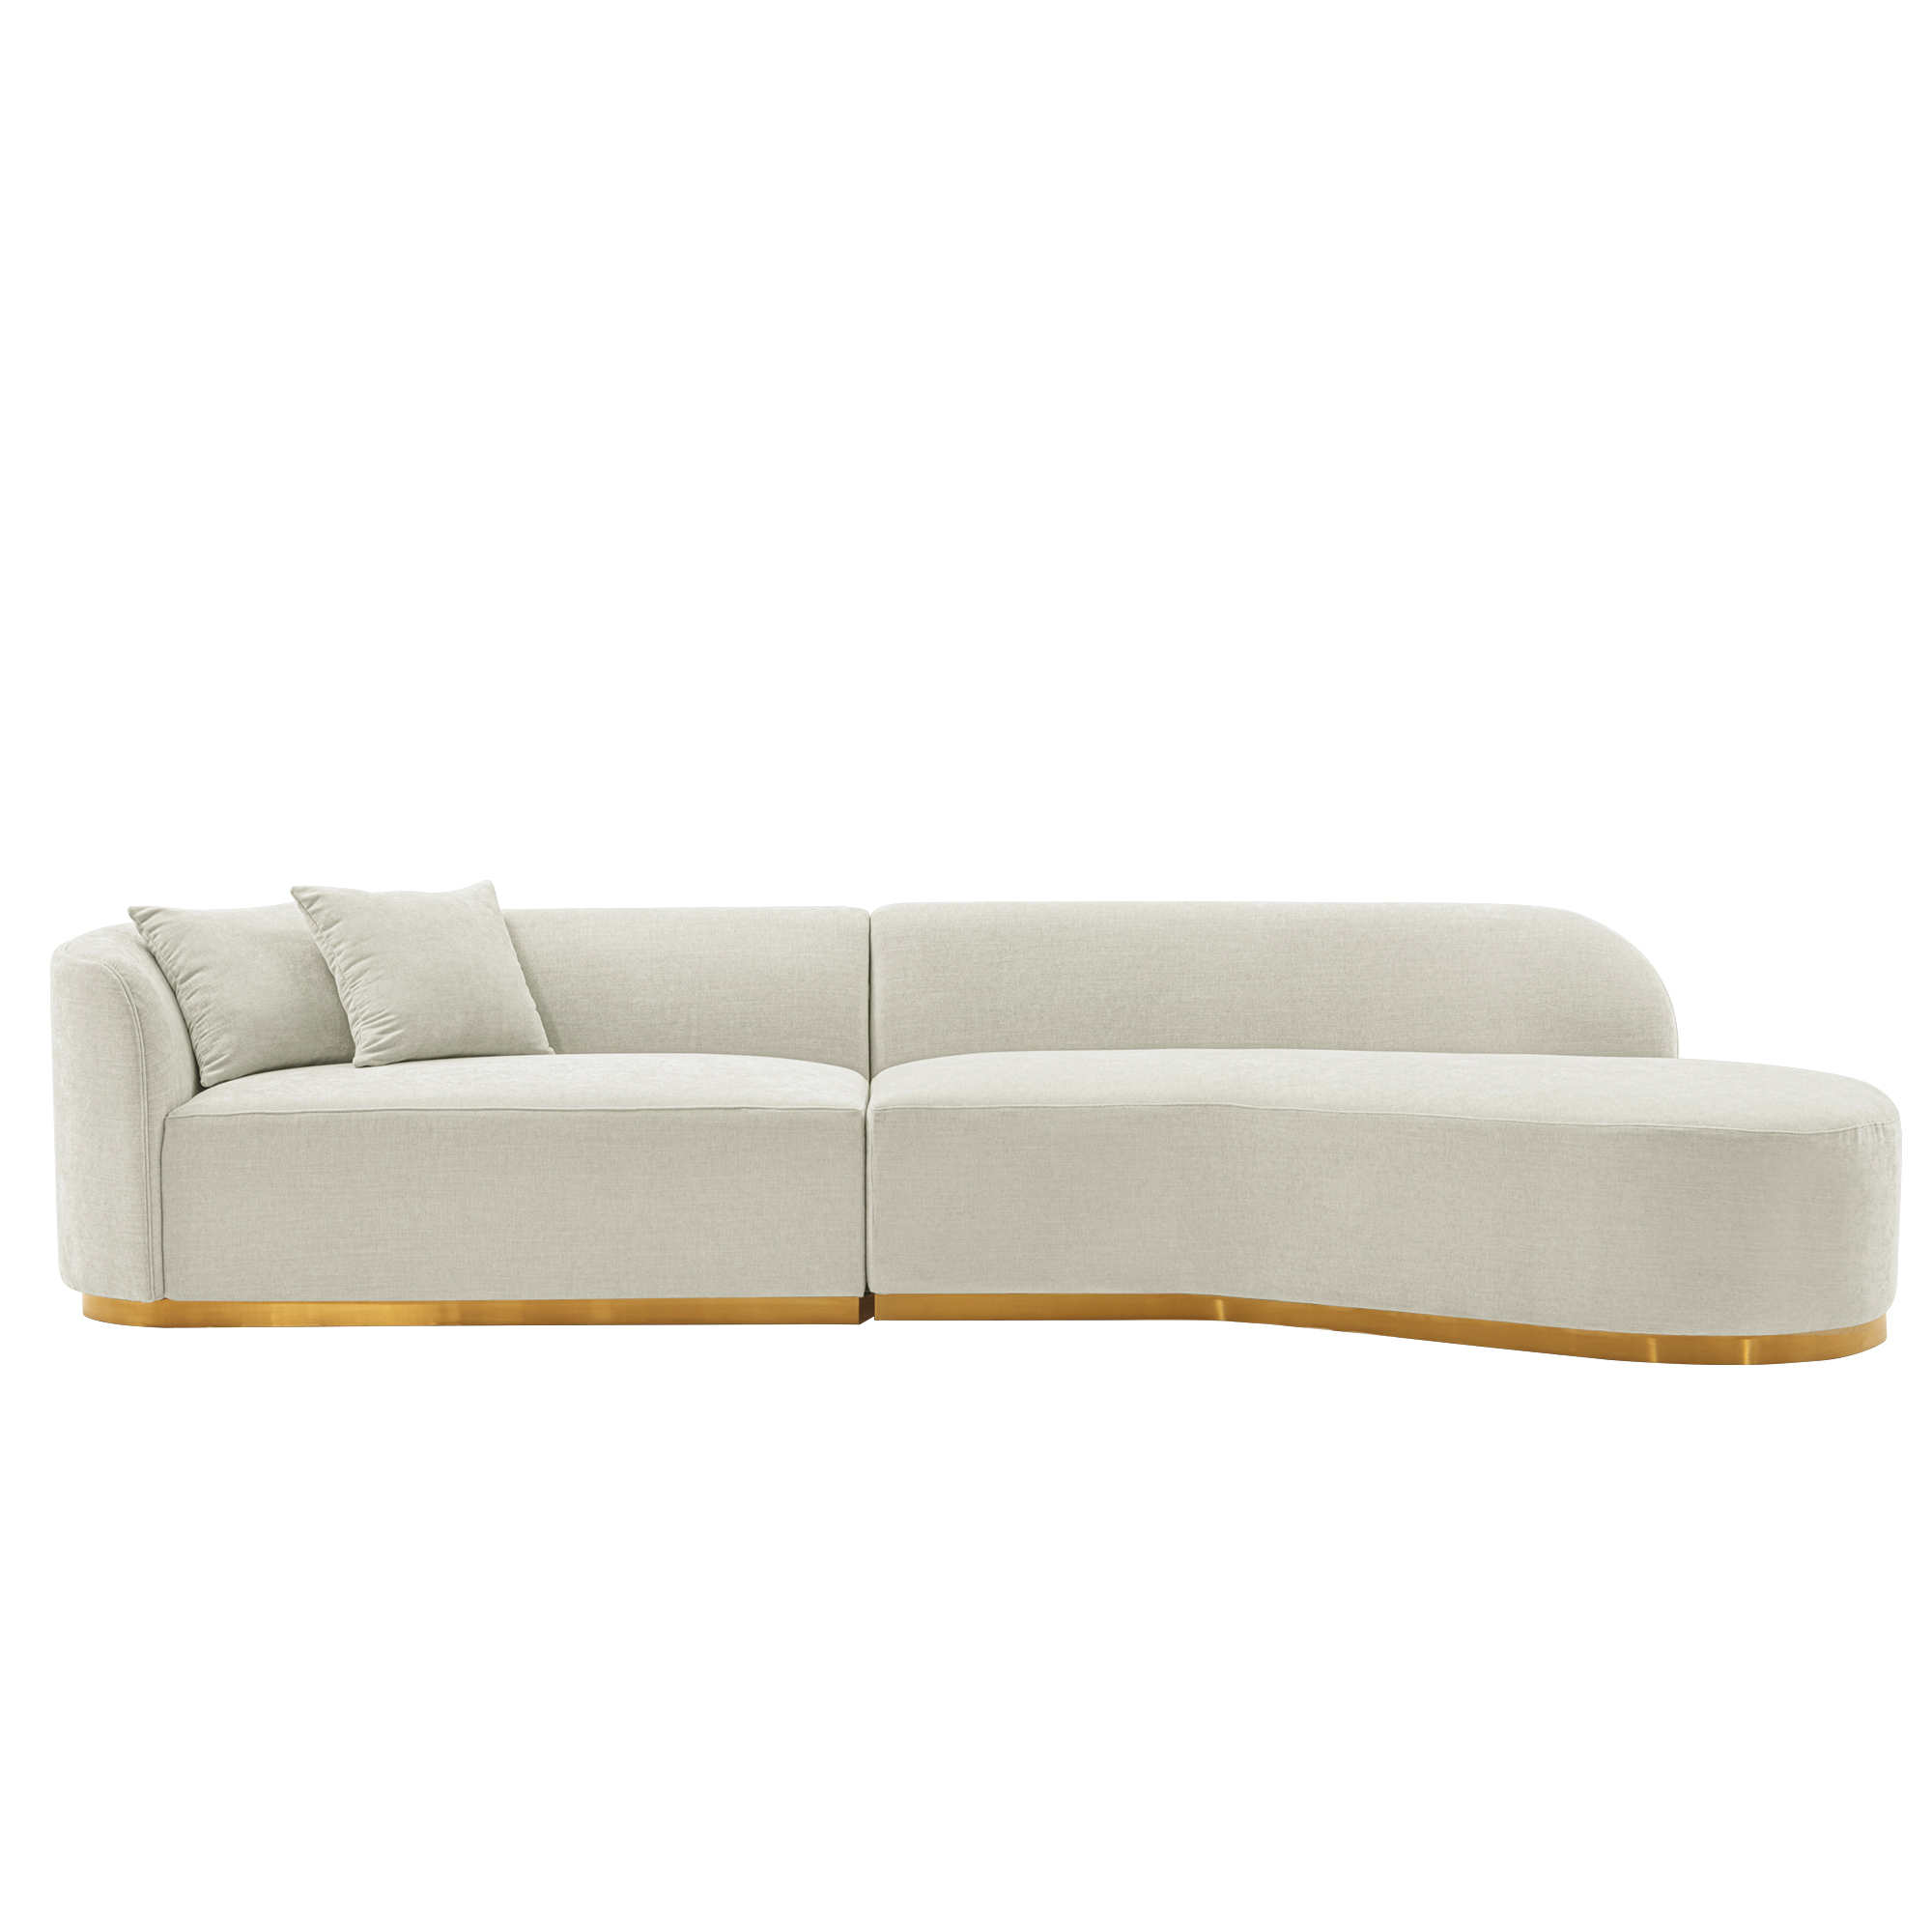 Manhattan Comfort, Daria Linen Sofa Sectional with Pillows in Ivory, Primary Color Ivory, Included (qty.) 1 Model SF012